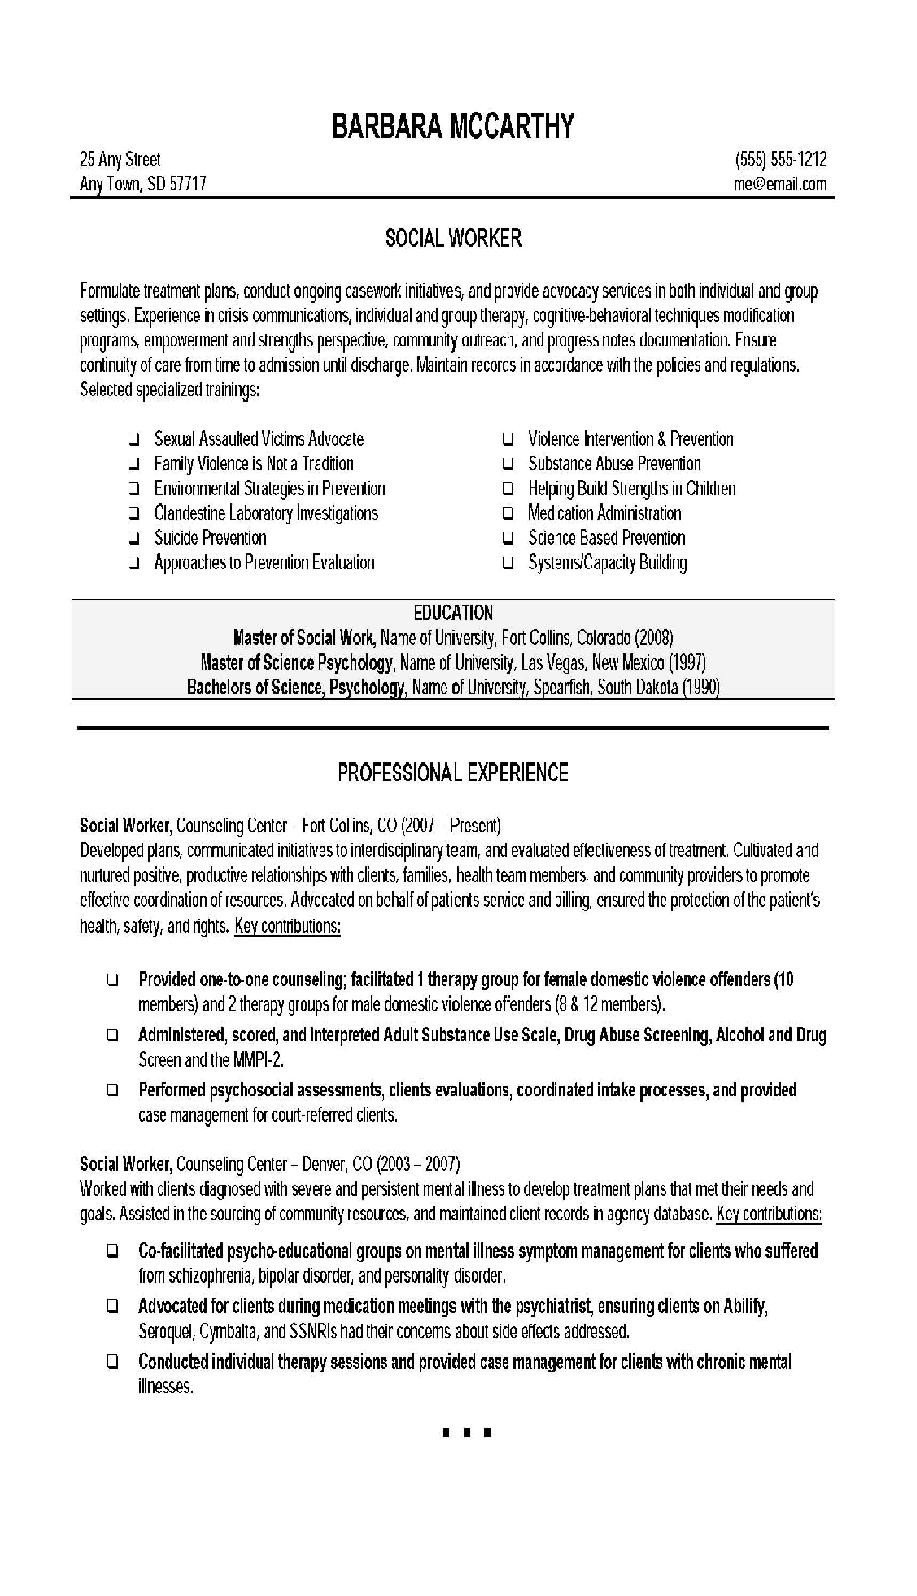 Social Worker Resume Templates social Work Resume Objective Statement